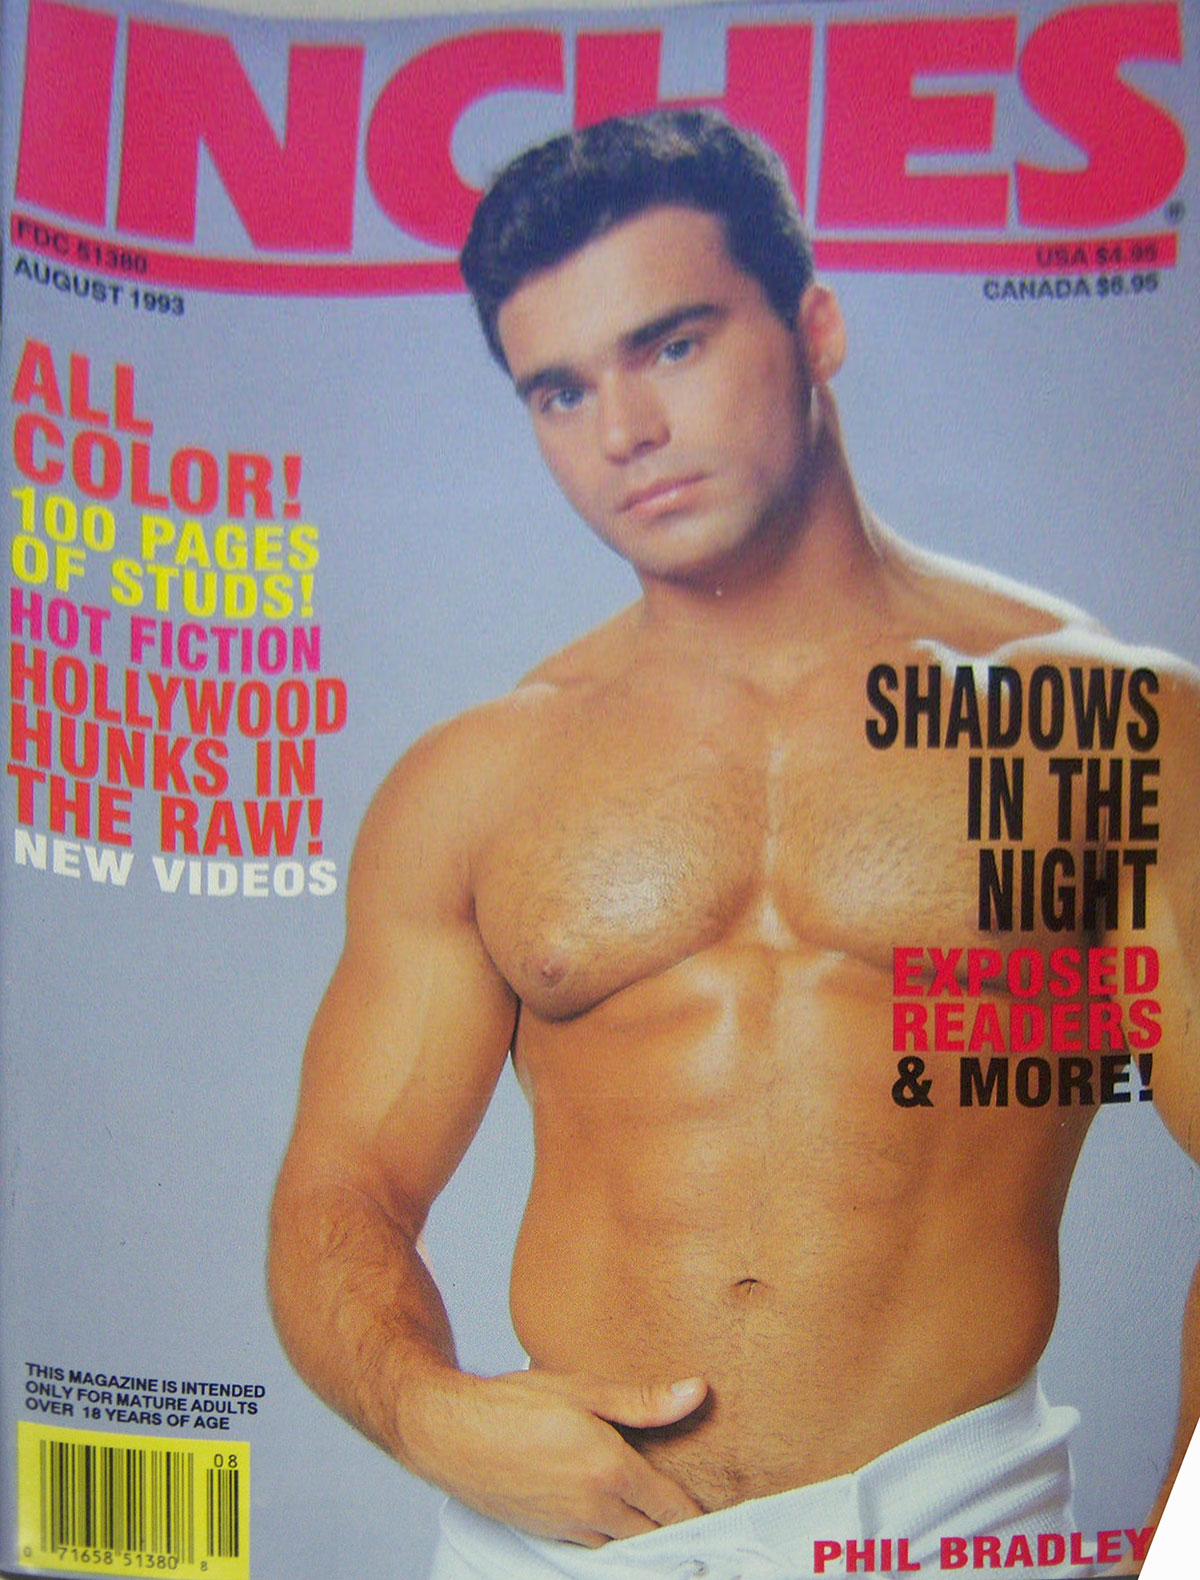 Inches August 1993 magazine back issue Inches magizine back copy Inches August 1993 Naked Men Gay Adult Magazine Bak Issue Published by  Mavety Media Group. All Color! 100 Pages Of Studs! Hot Fiction Hollywood Hunks In The Raw! New Videos.